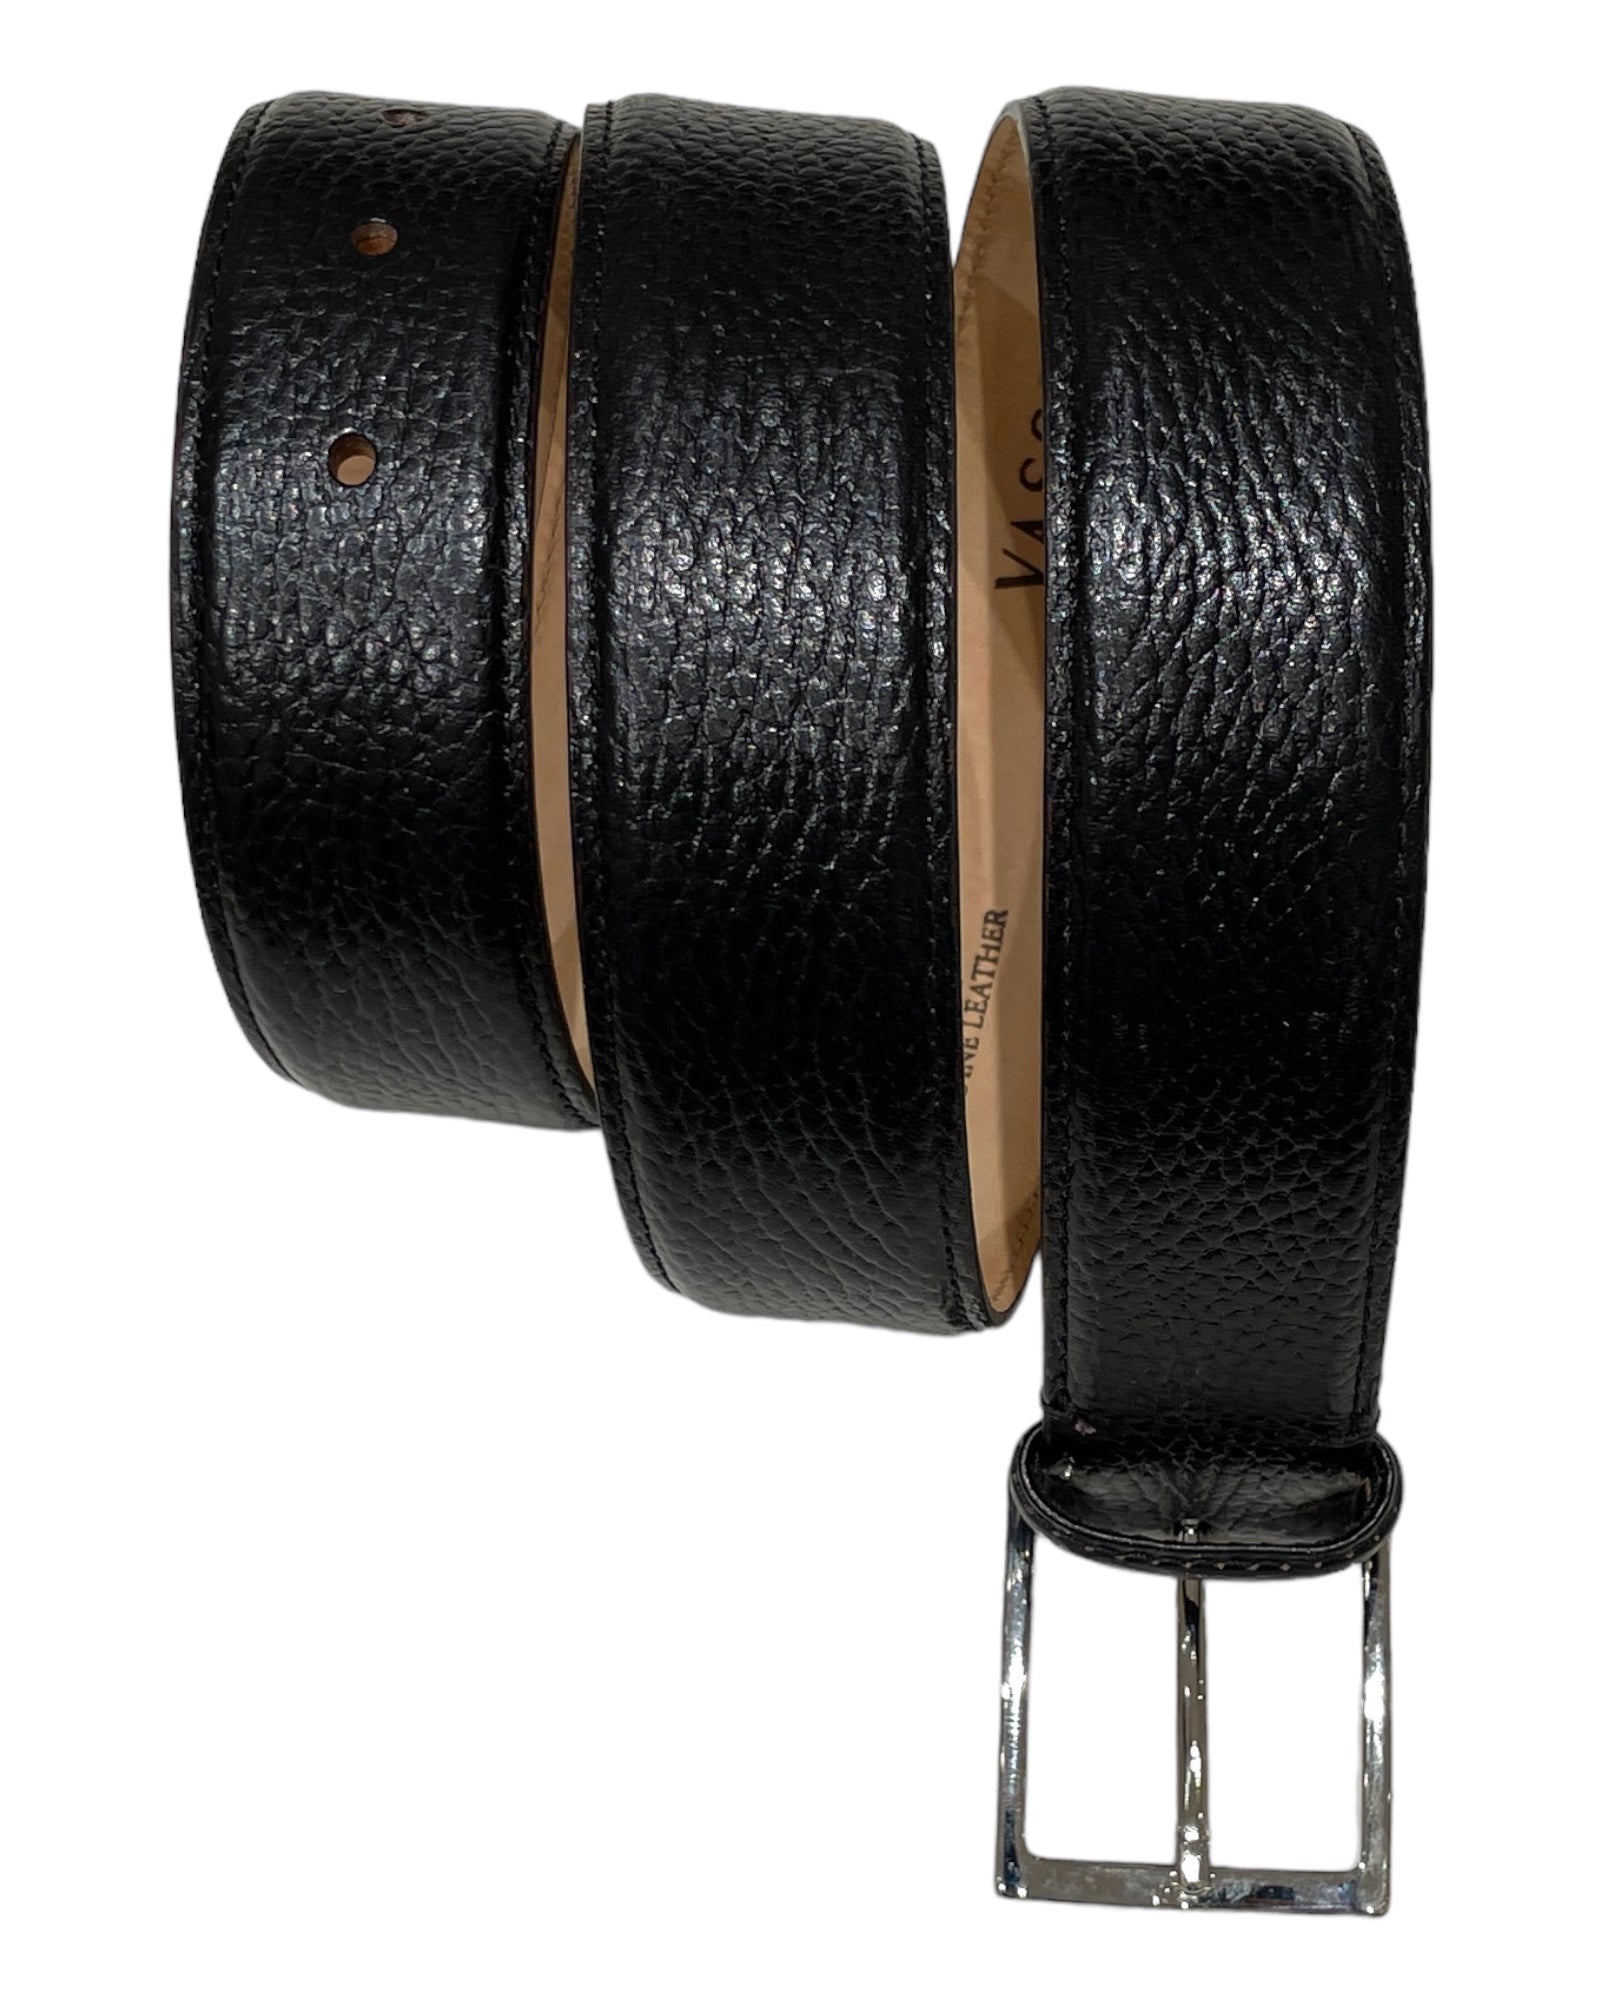 BISON PRINT LEATHER BLACK WITH SILVER BUCKLE BELTS36